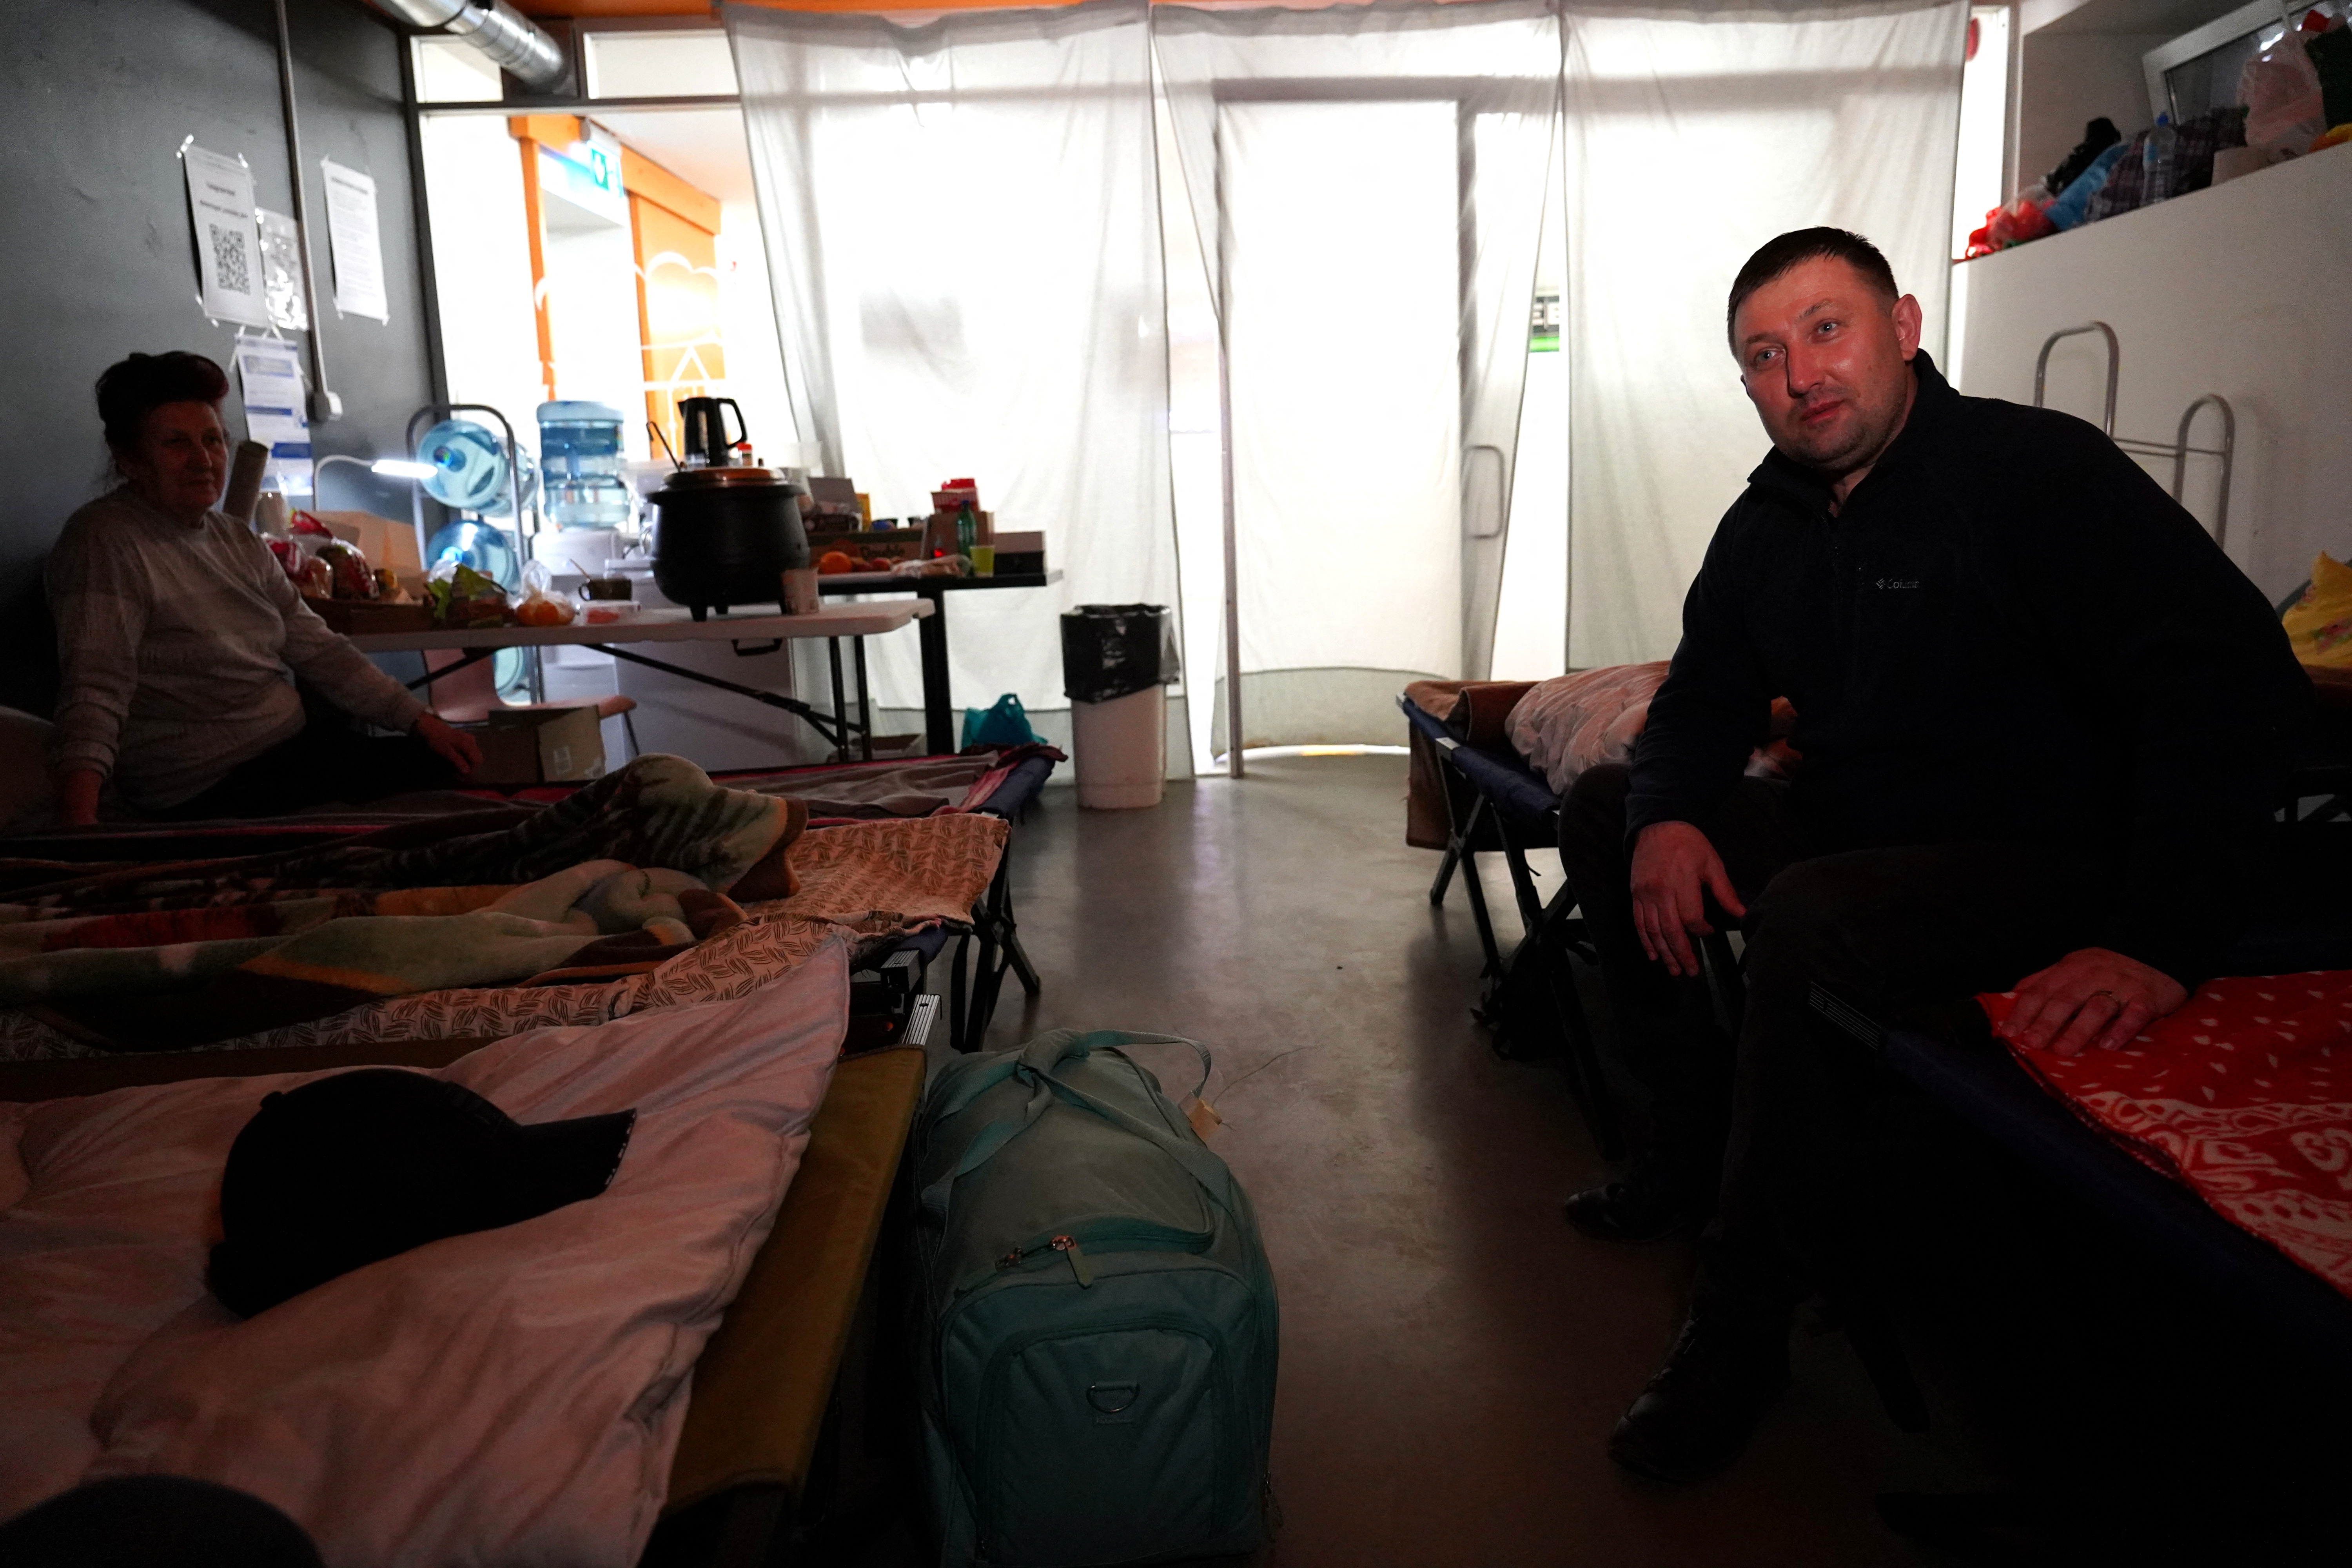 Ukrainian refugees arrive via buses at the welcome center and sleeping facilities at Tallinn Bus Station